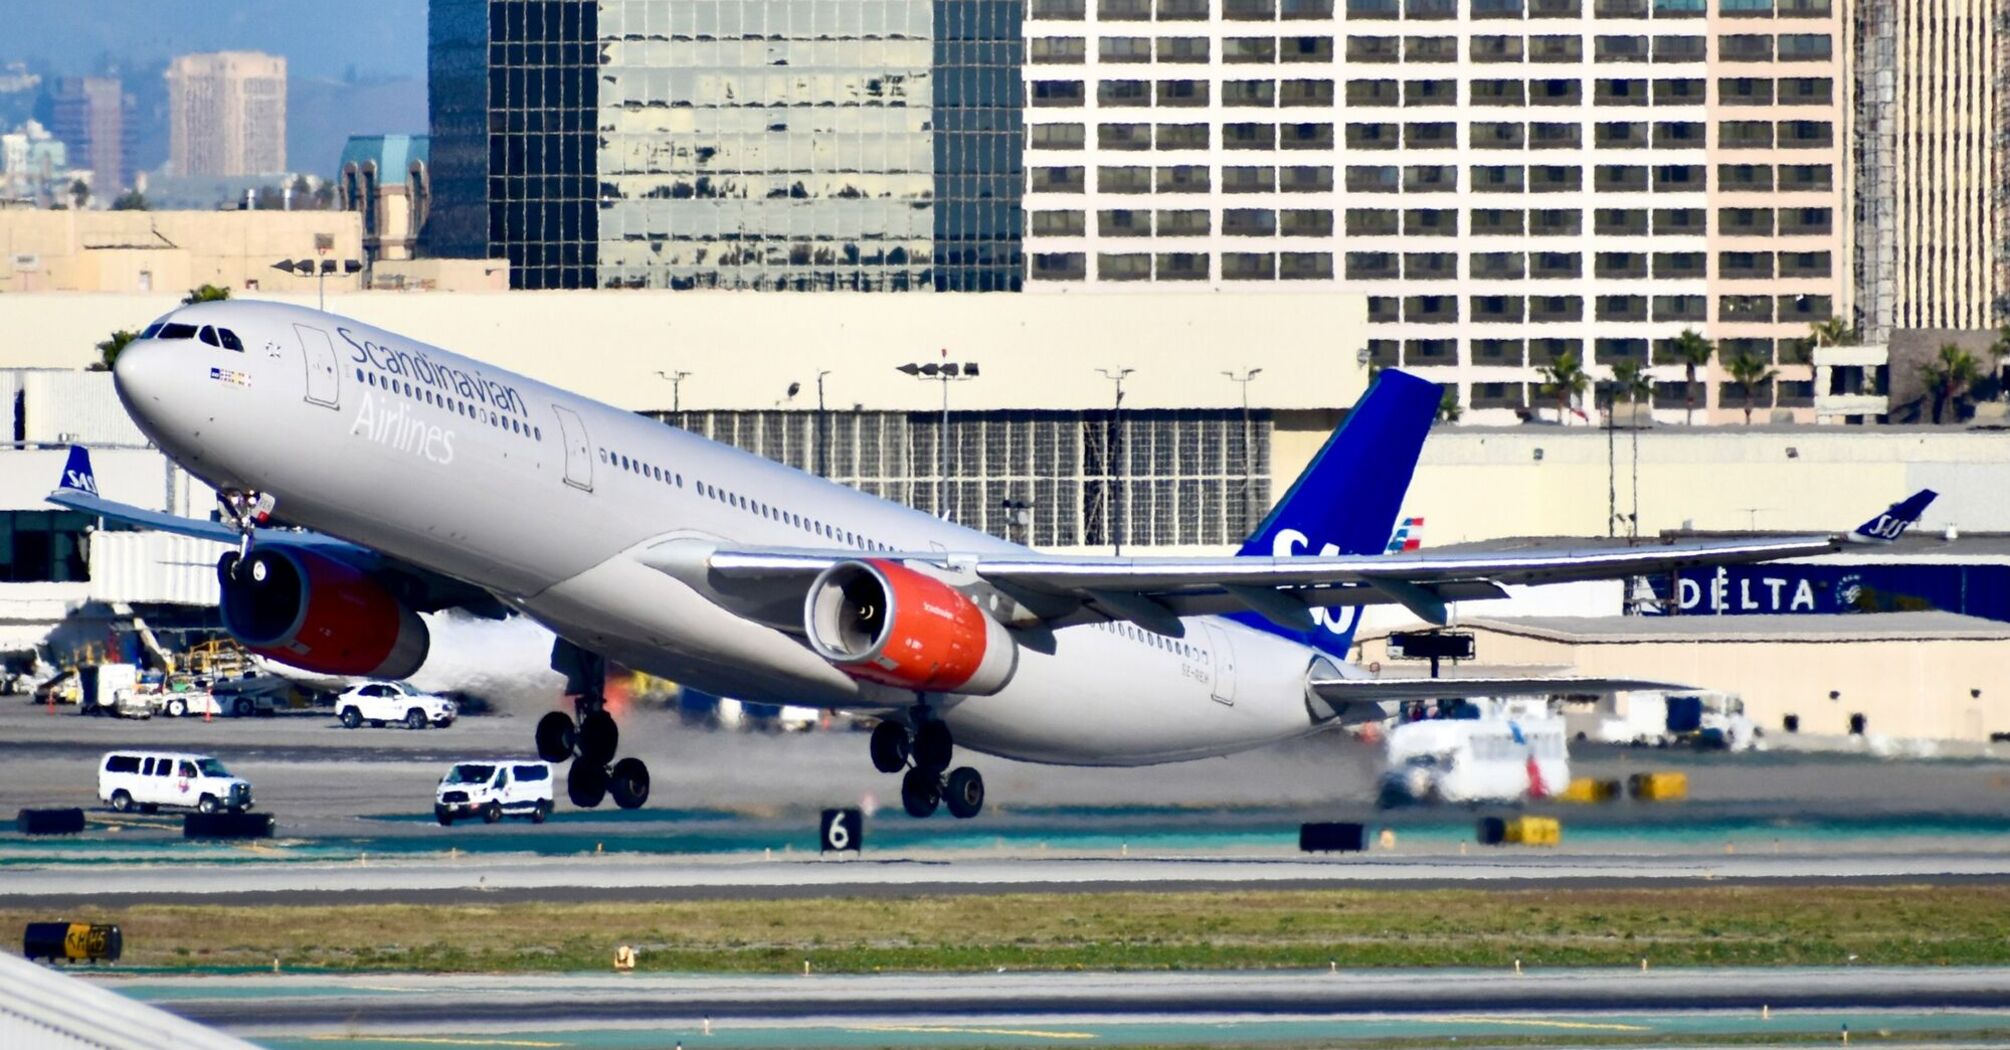 SAS airplane taking off from airport